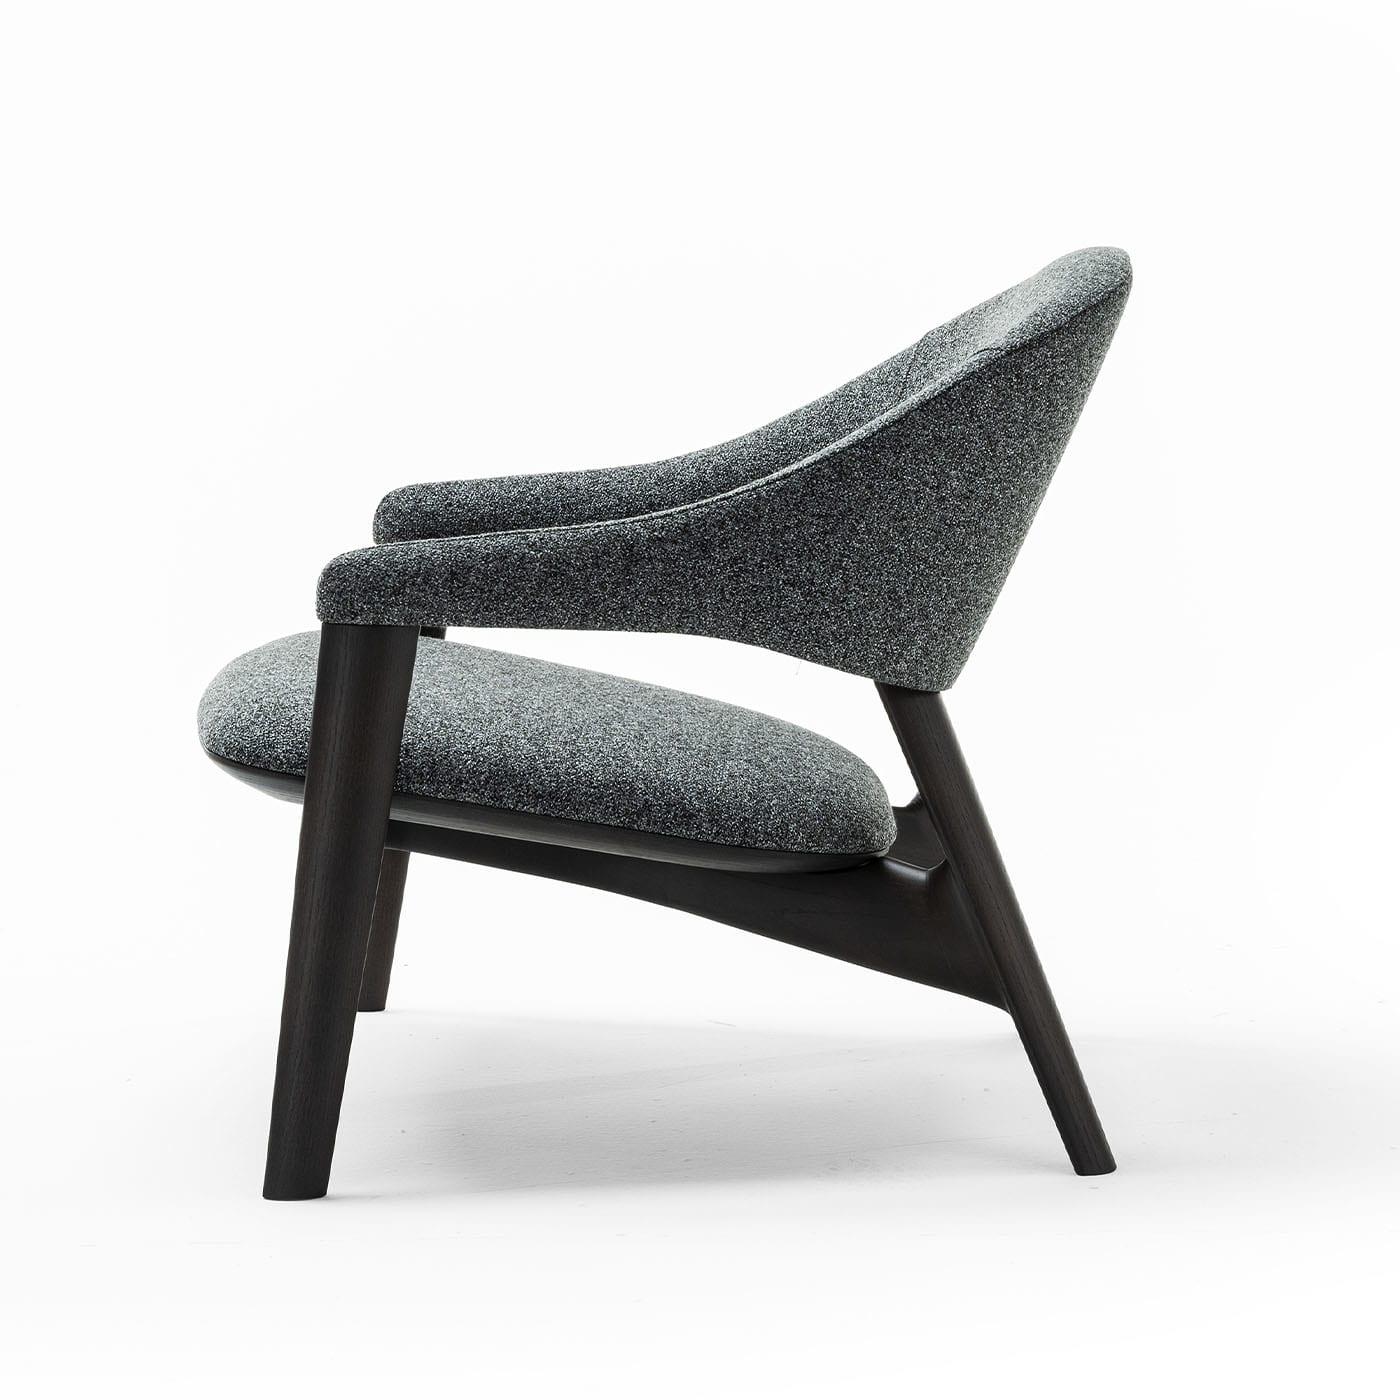 Enveloping curves also tracing sloped profiles for an experience of impeccable comfort define this armchair, a modern-style piece equally apt for suiting residential or professional settings. A refined gray melange fabric seals the wide inclined